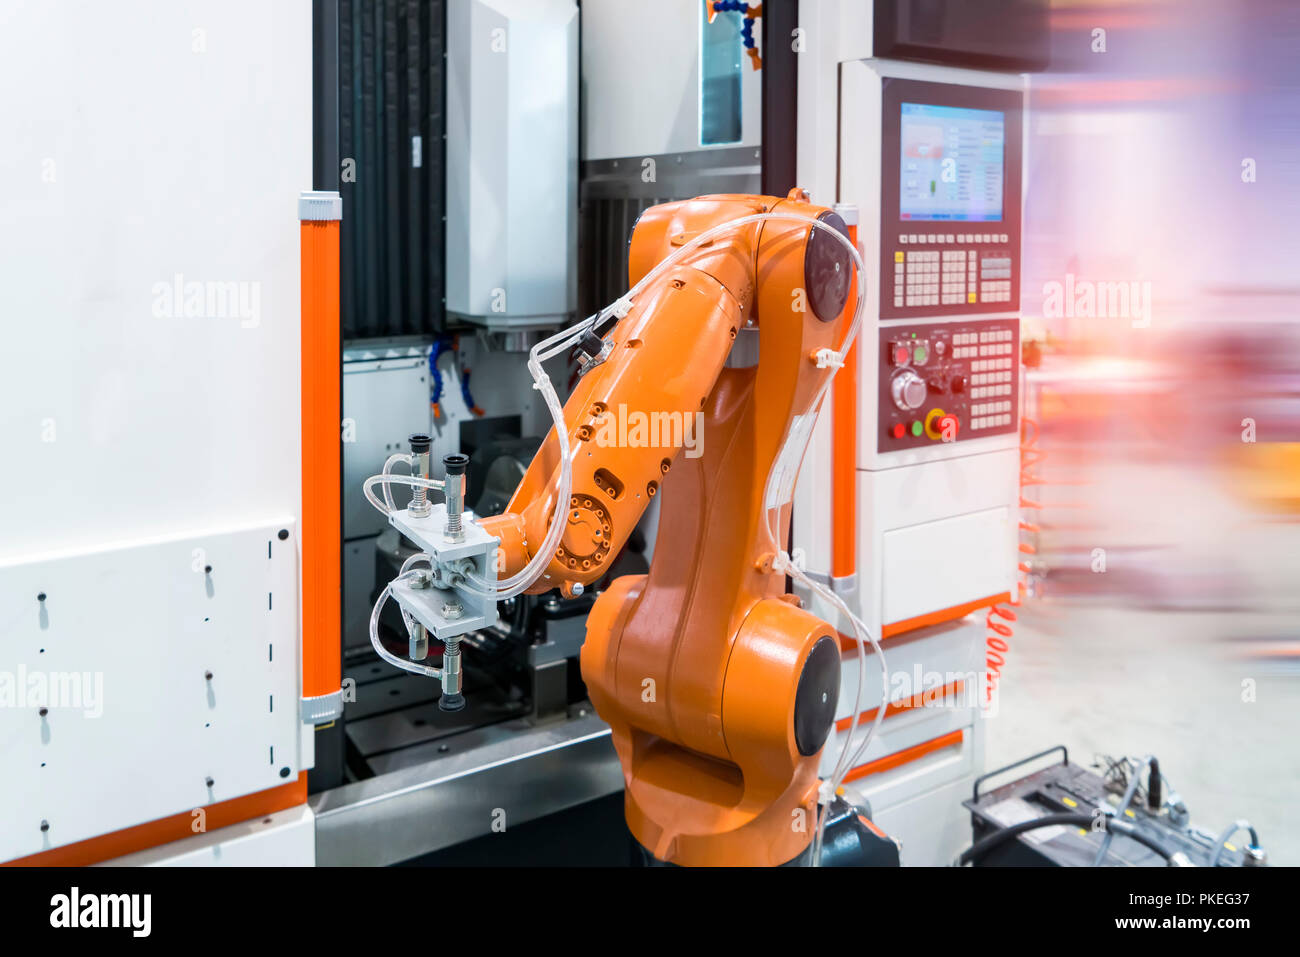 robotic arm machine tool at industrial manufacture plant,Smart factory industry 4.0 concept. Stock Photo